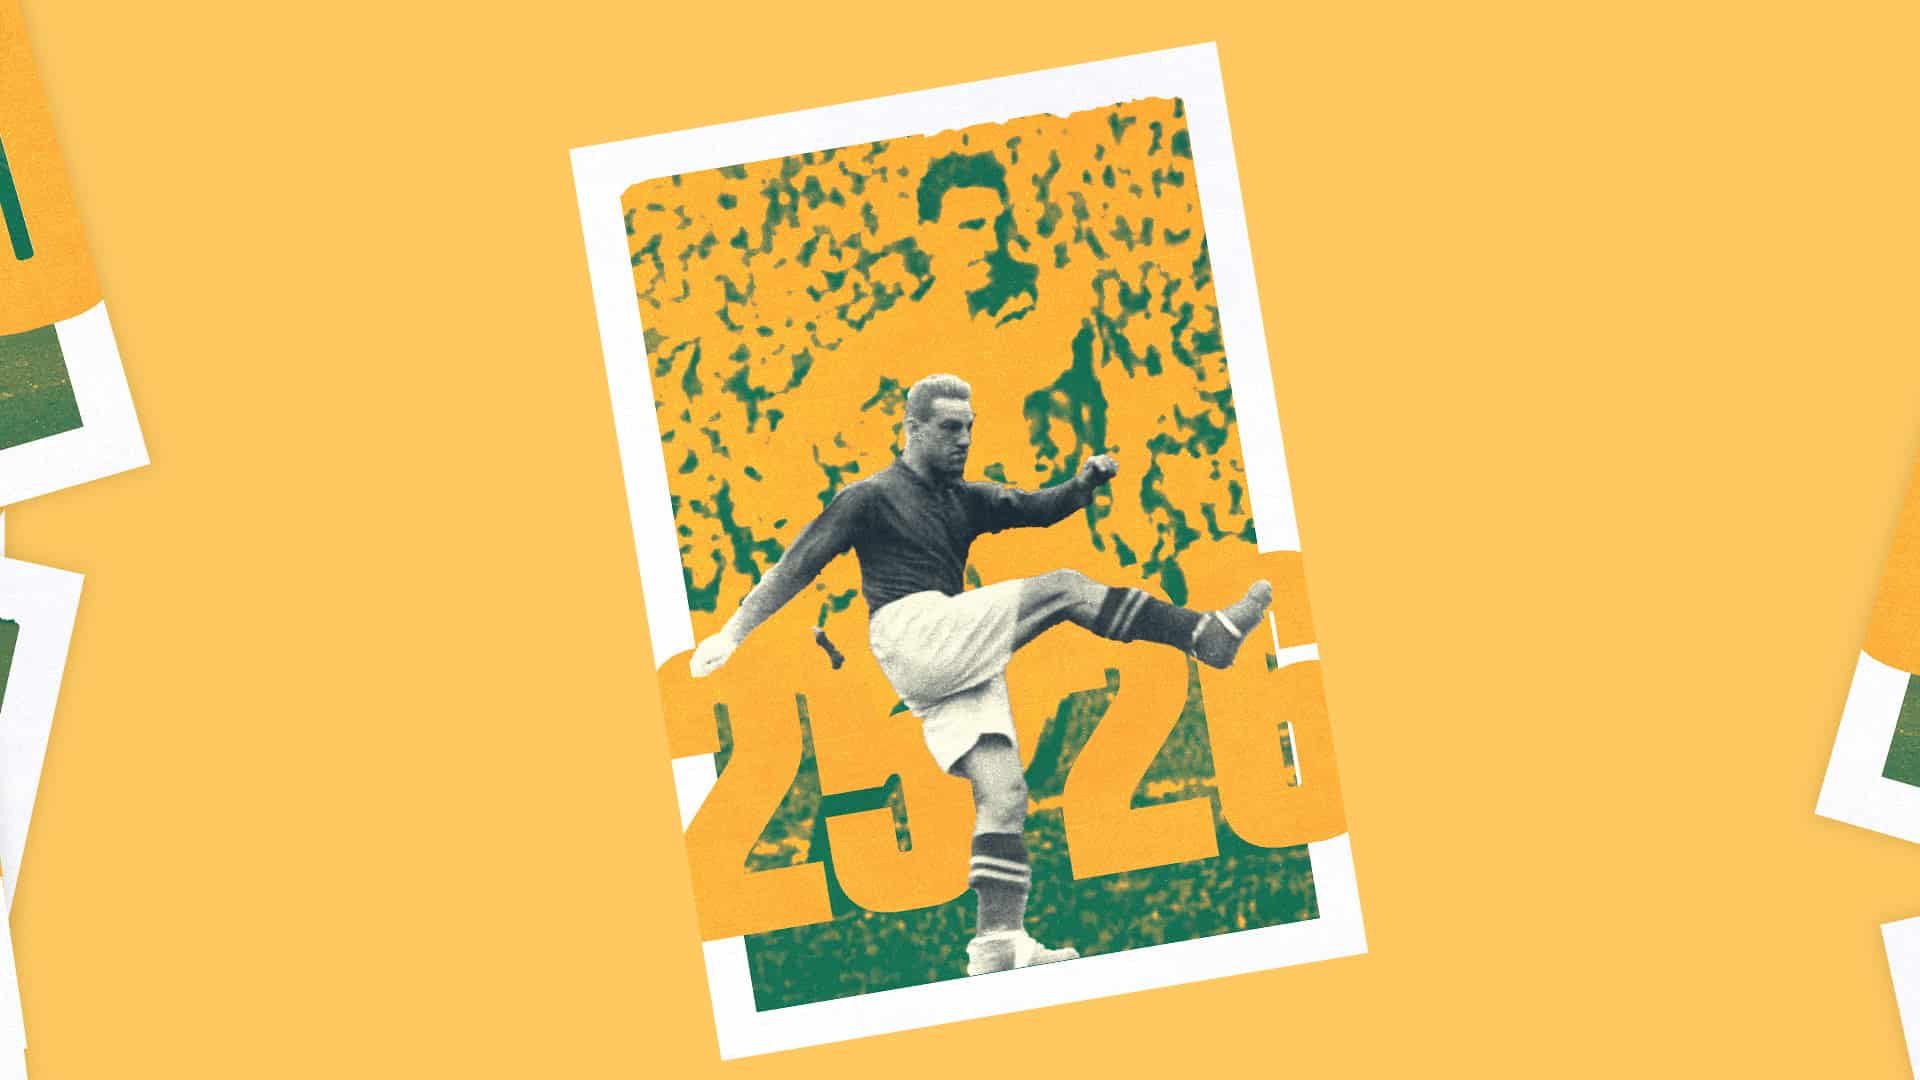 Tom Jennings, his leg outstretched after kicking a shot probably into the net, in front of the numbers 25/26, in front of another image of Jennings playing for Leeds